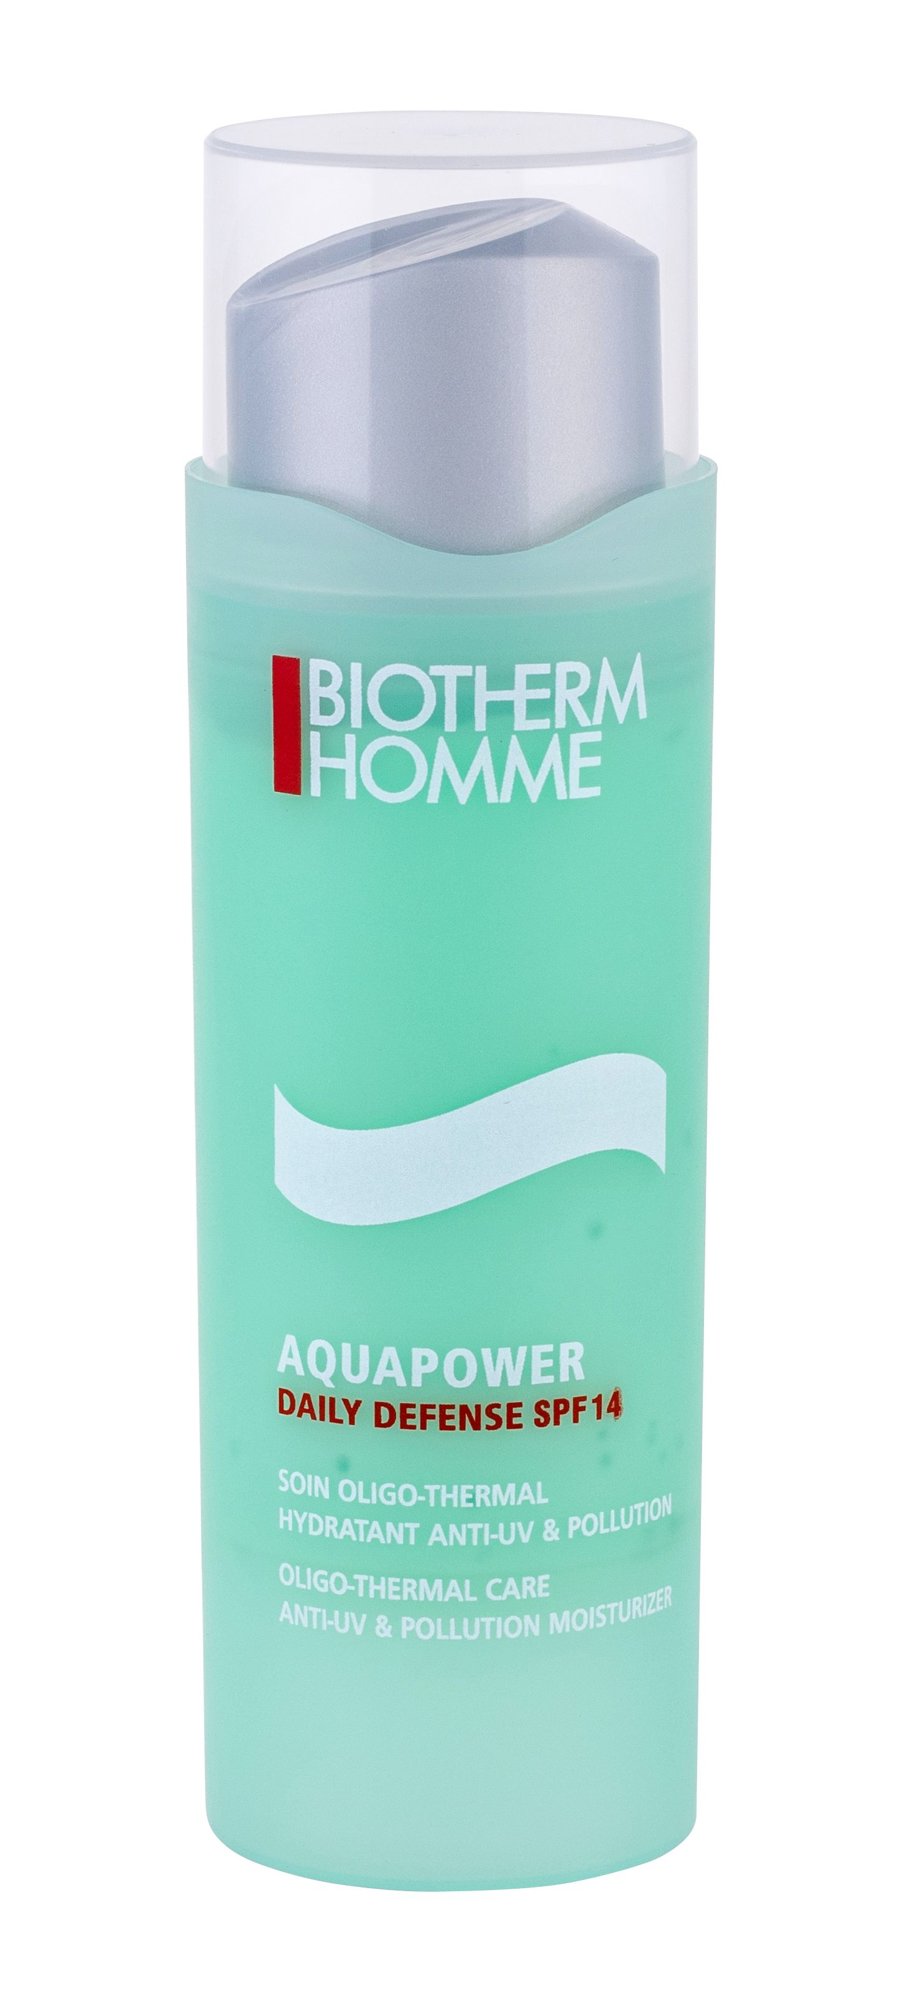 Biotherm Homme Aquapower Daily Defense SPF14